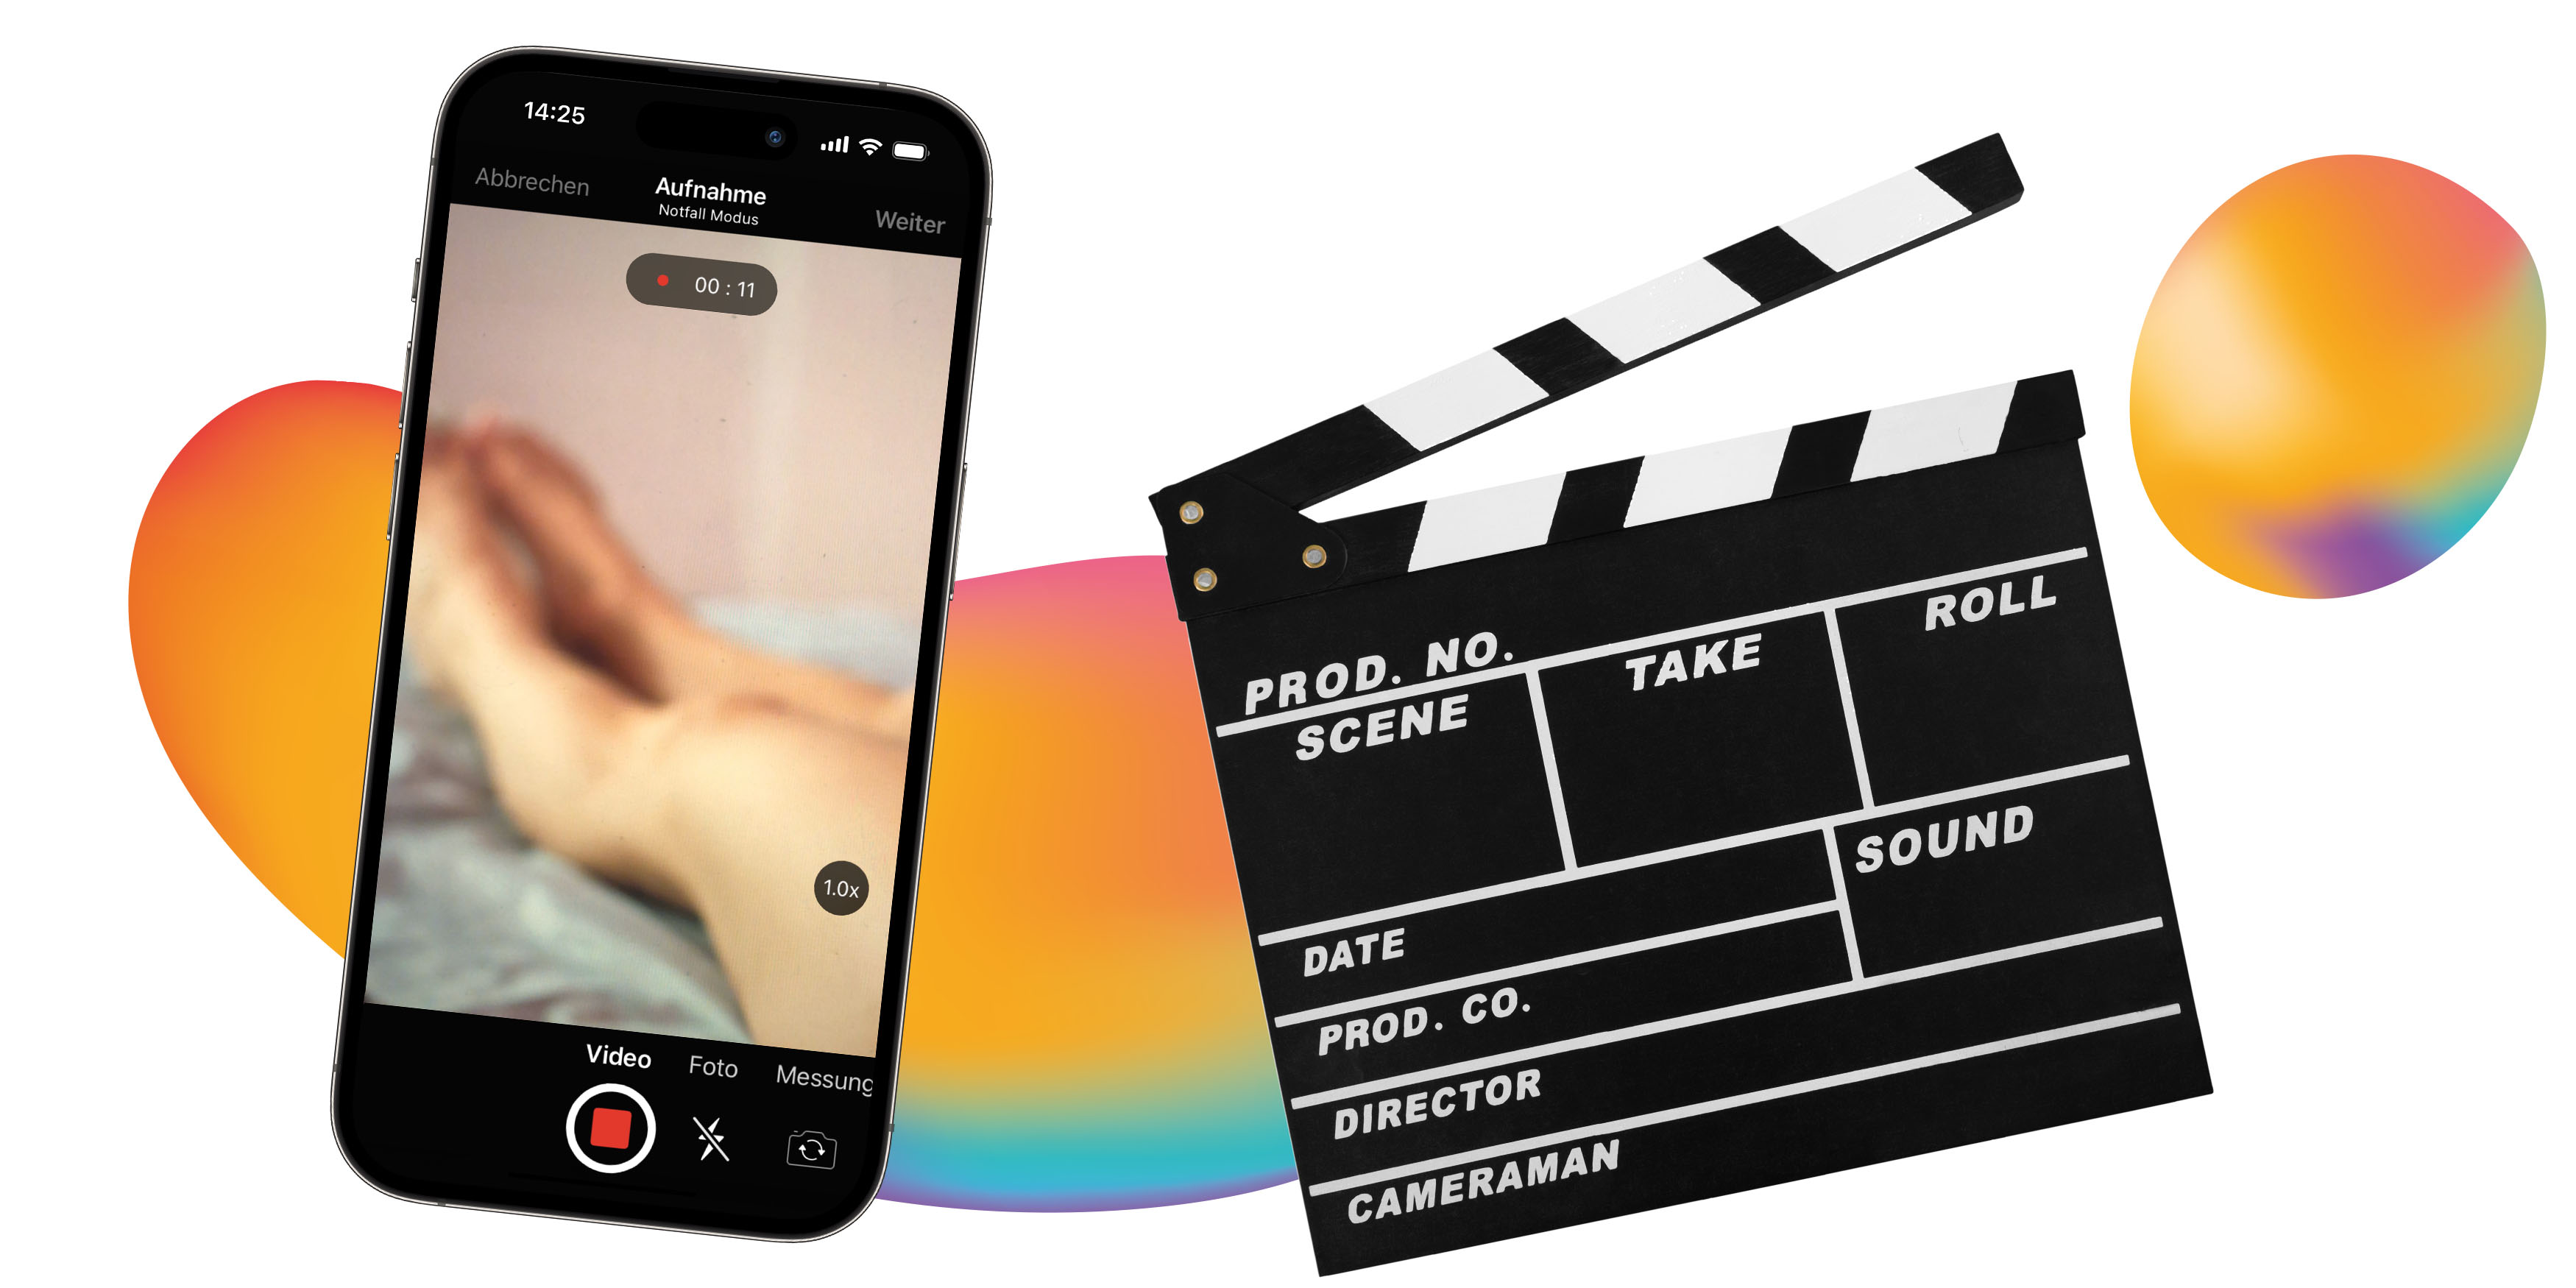 Medical videos recorded with your smartphone - stored securely